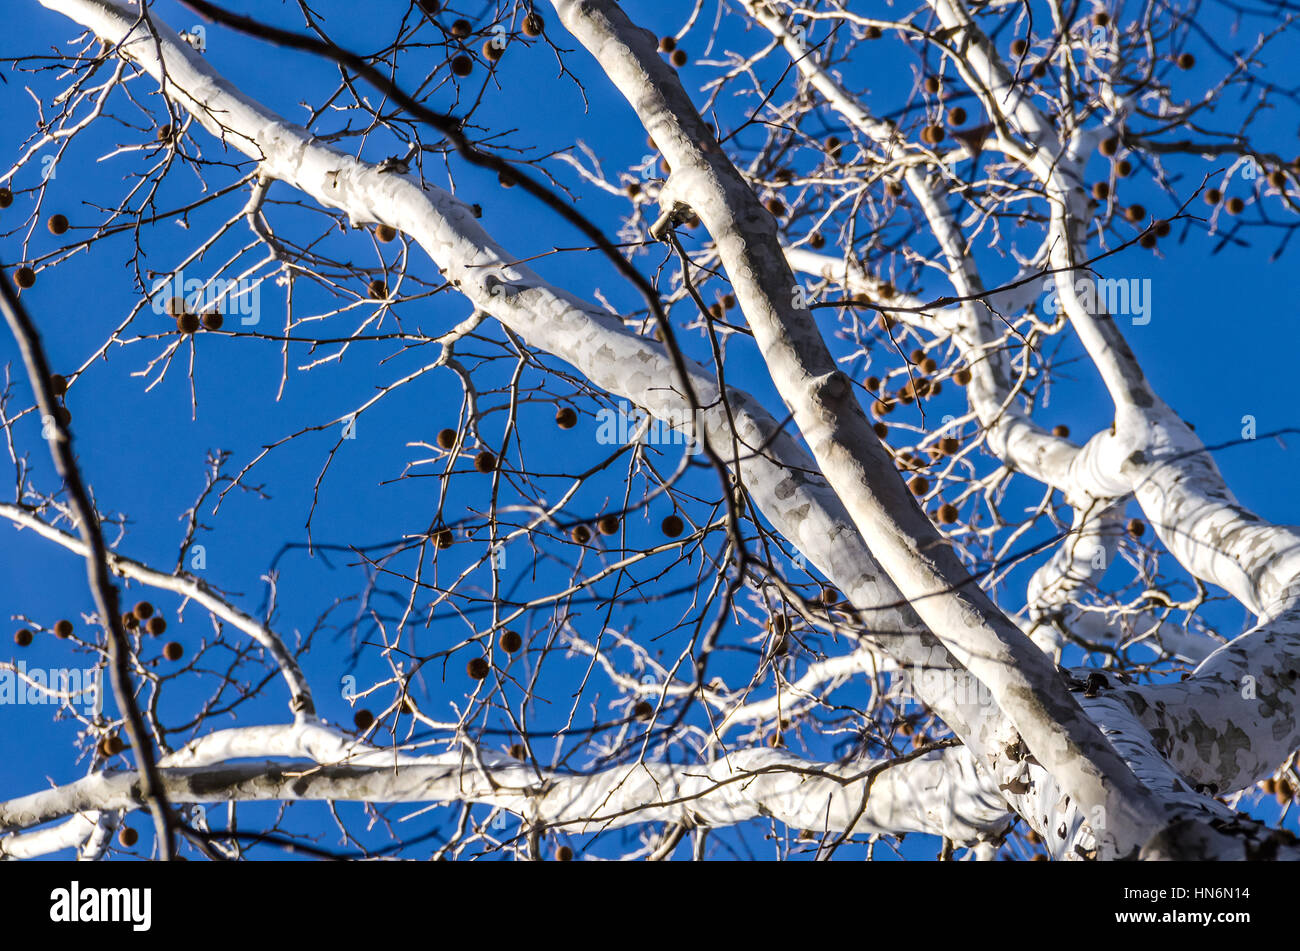 White bark American sycamore tree (Platanus occidentalis) with spiky fruit in winter against blue sky Stock Photo